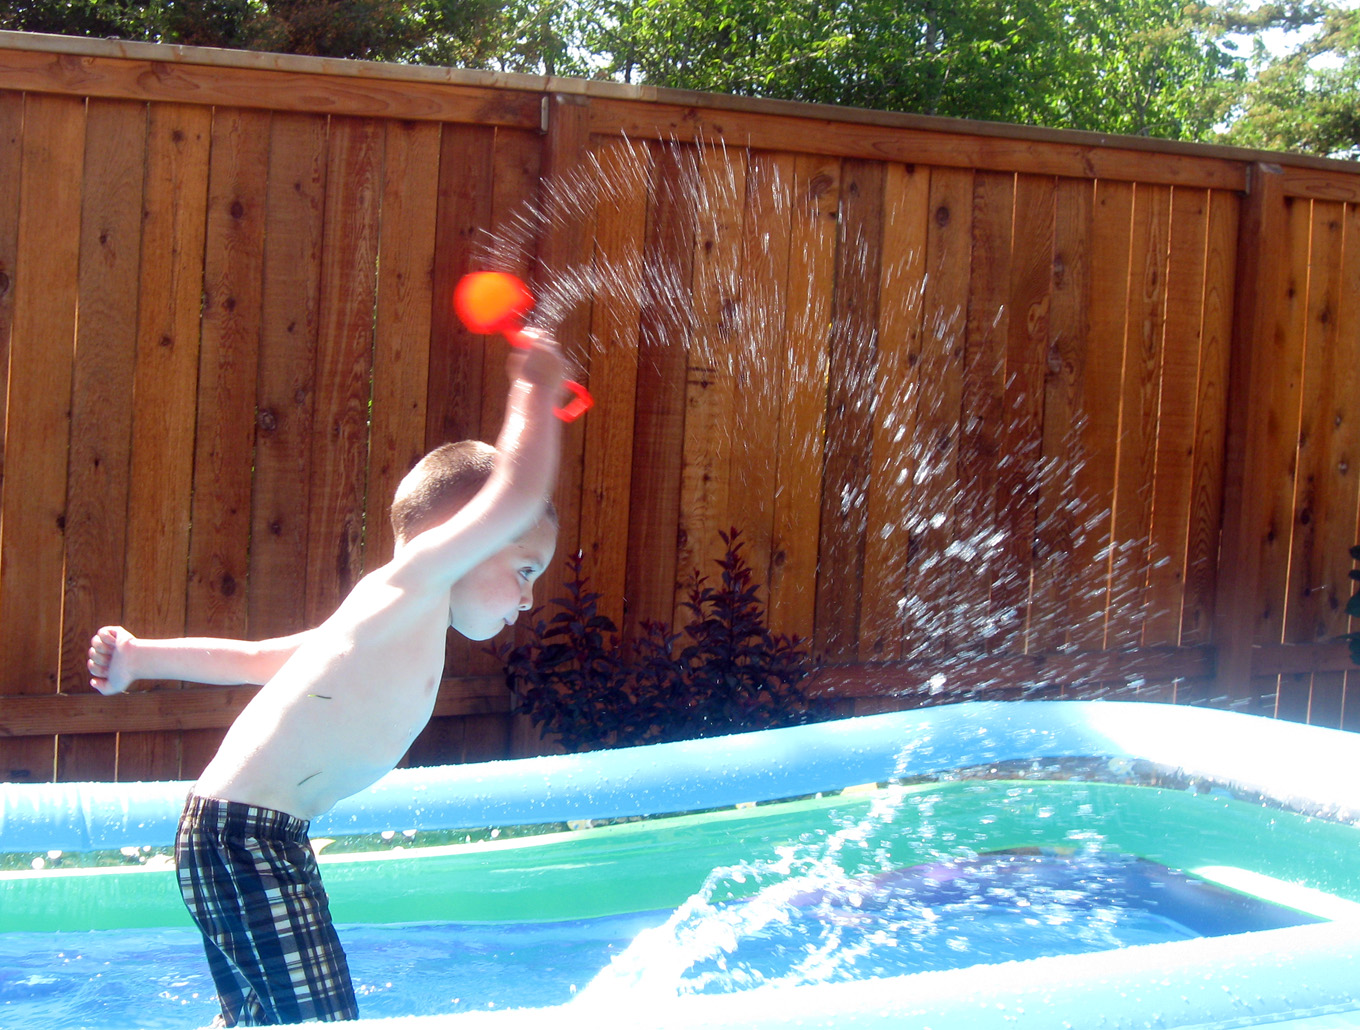 a small boy splashes water from an inflatable pool